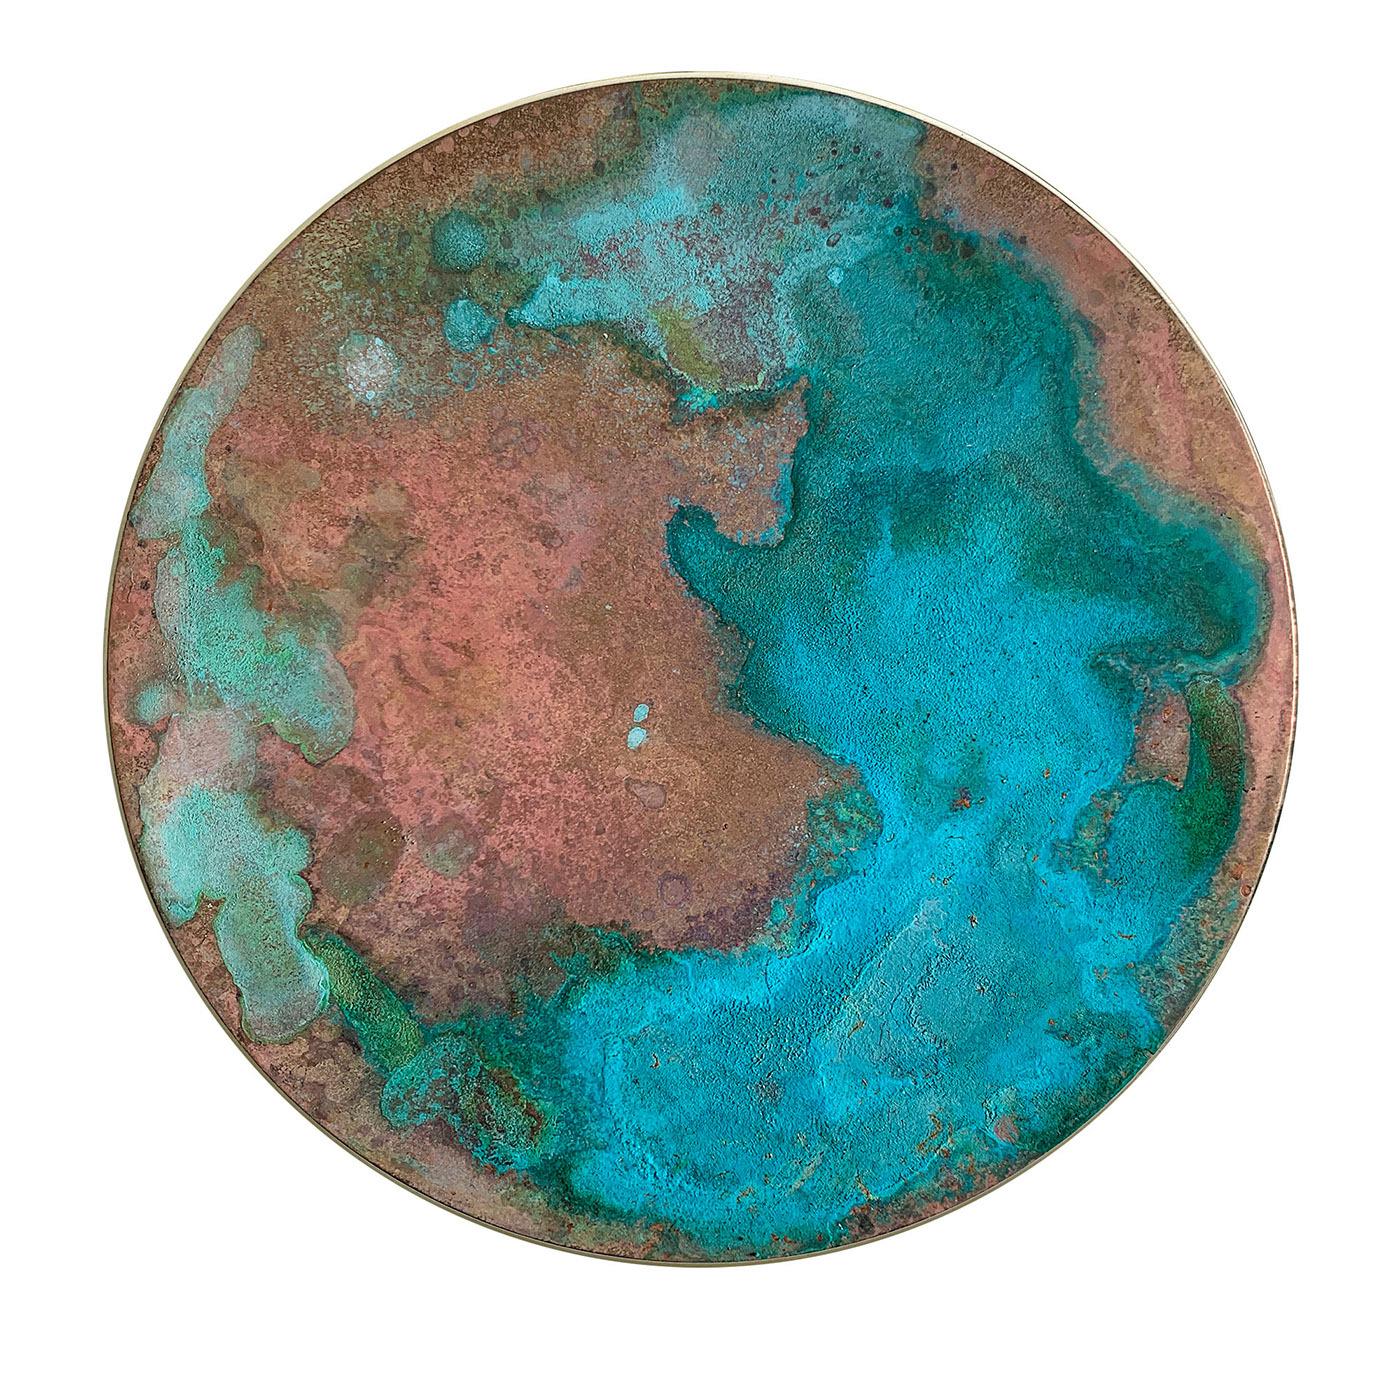 Turquoise clouds accented with teal blotches and emerging from a pink-toned backdrop distinguish the singular look of this decorative brass disk where acids and oxides are employed for a stunning visual and tactile experience. Part of the Aurora